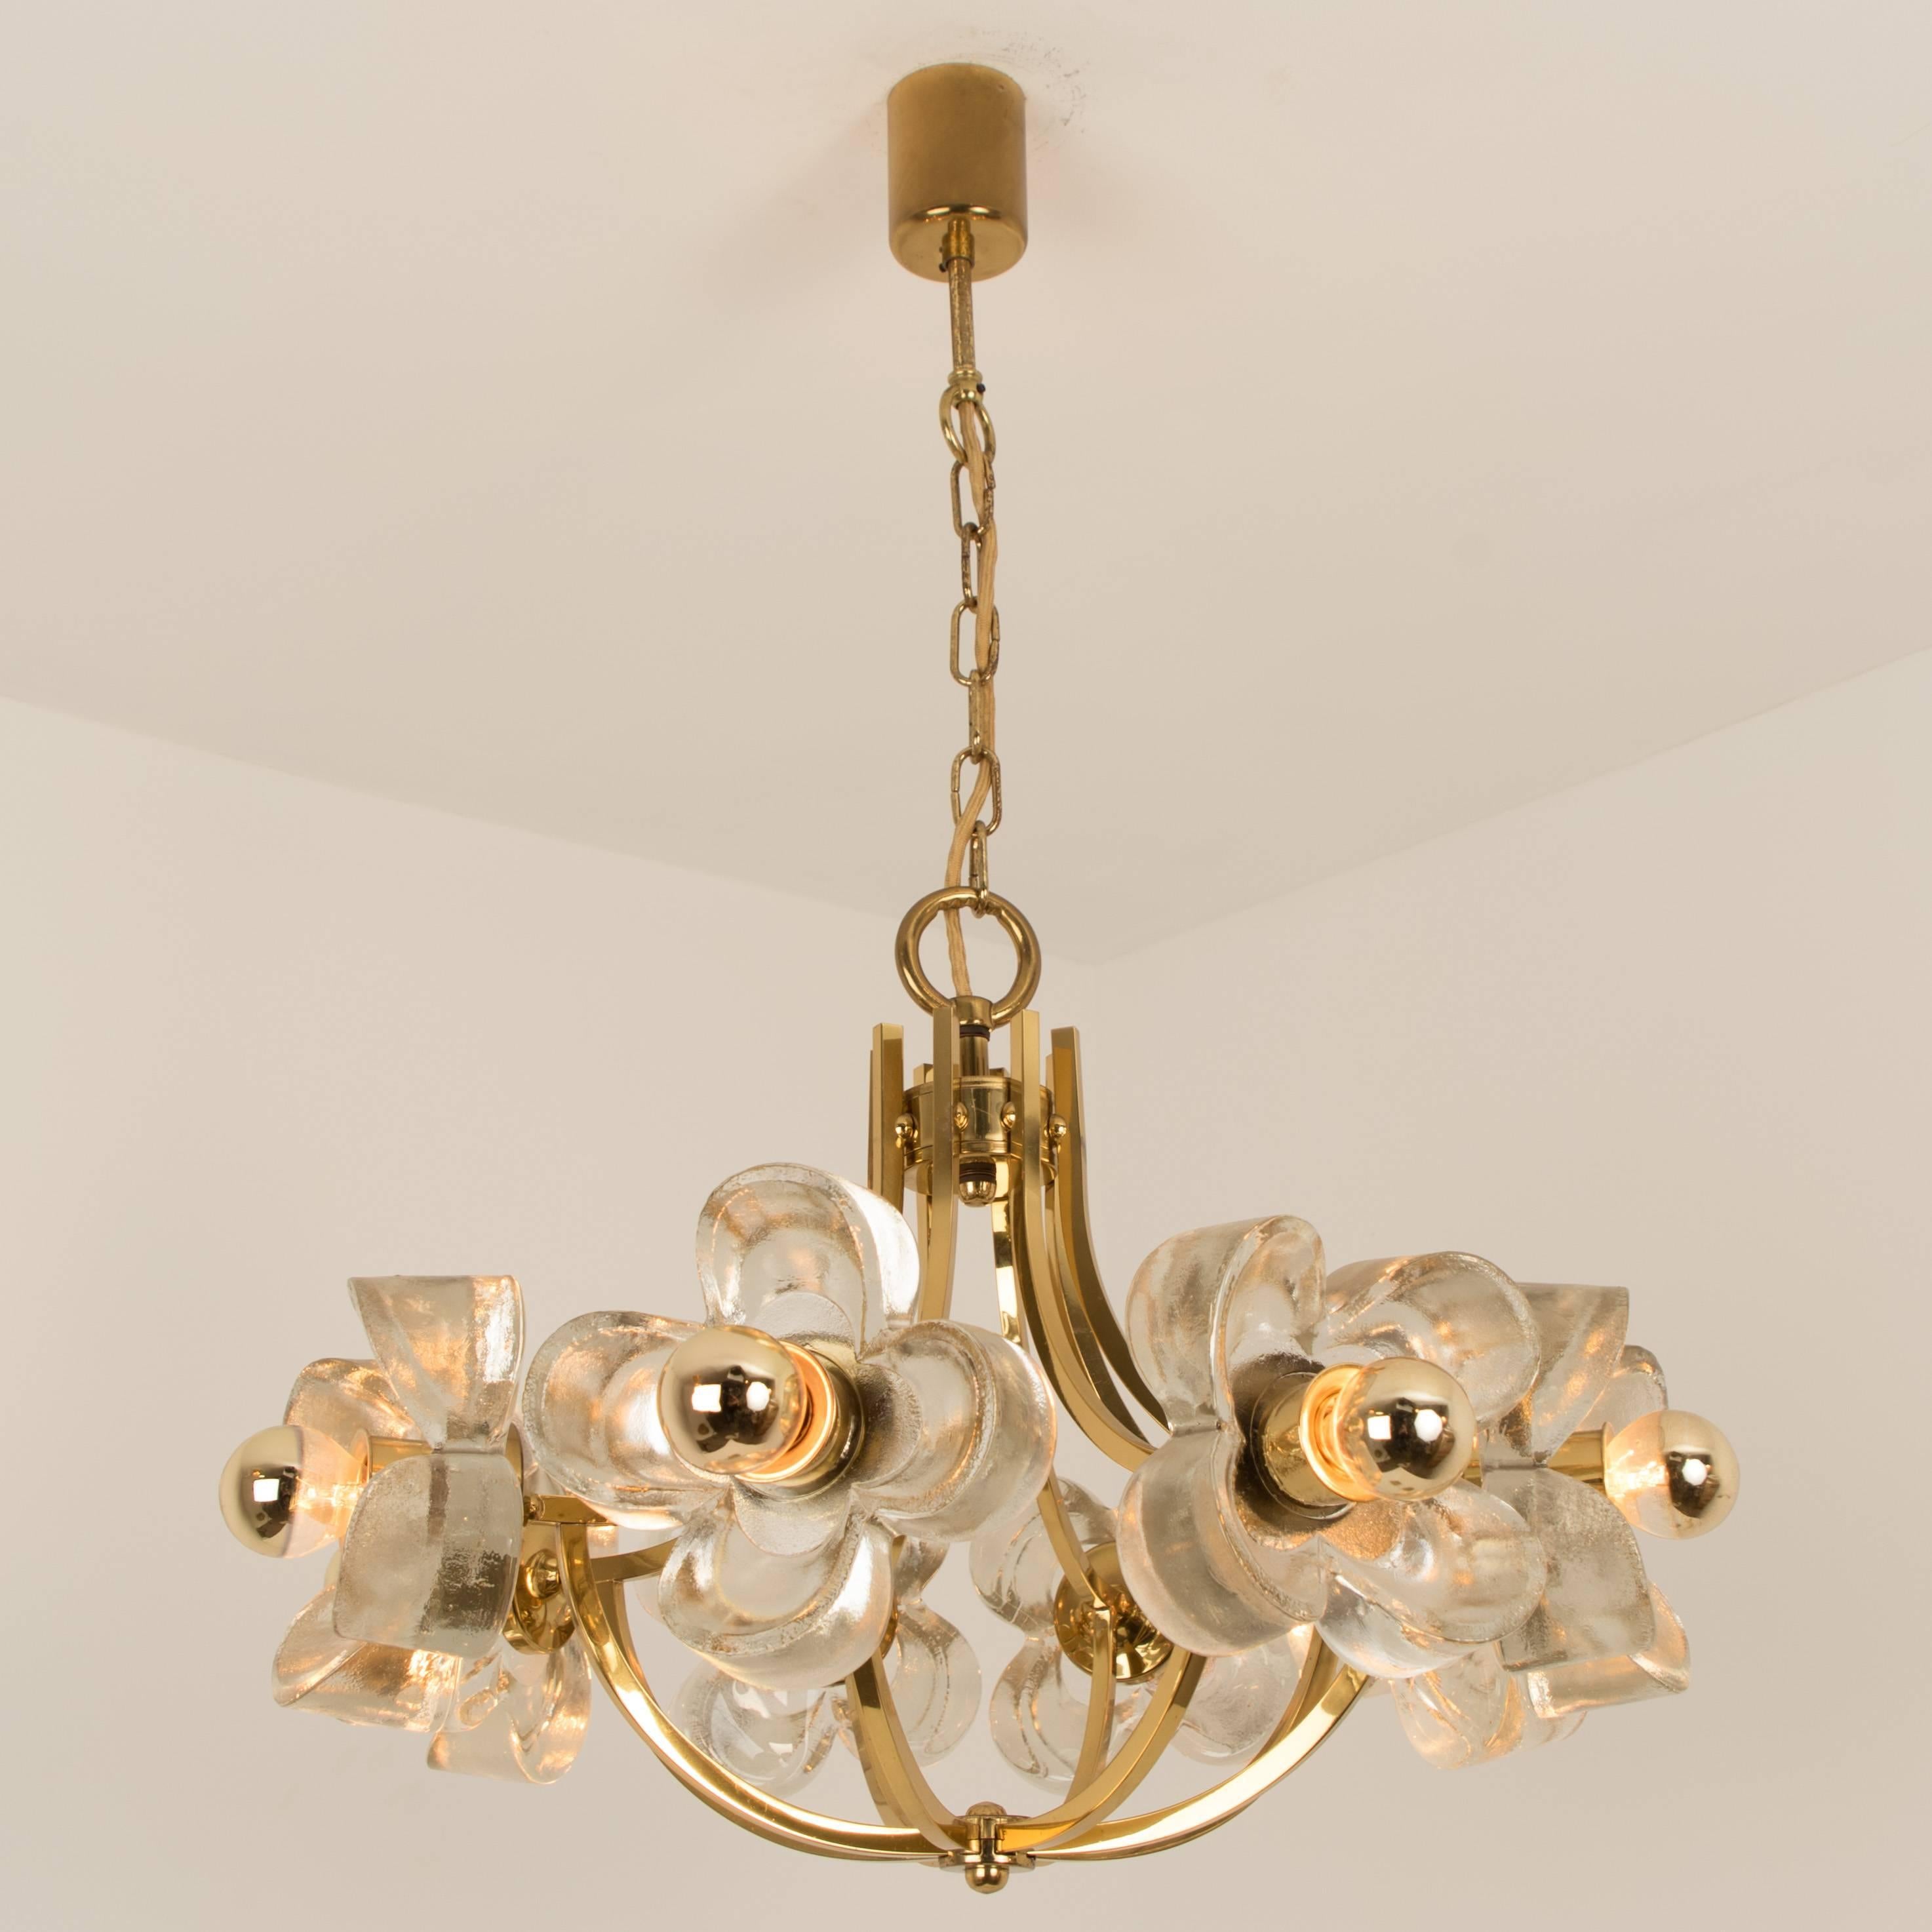 This ceiling light was designed  by  Simon and Schelle, featuring a rectangular brass base and eight massive glasses in the shape of a four lobed flower. 

Dimensions: 
Hight 15.75( 40cm) total 51.18( 130 cm)
Diameter: 23.62(60 cm)
 
Very good